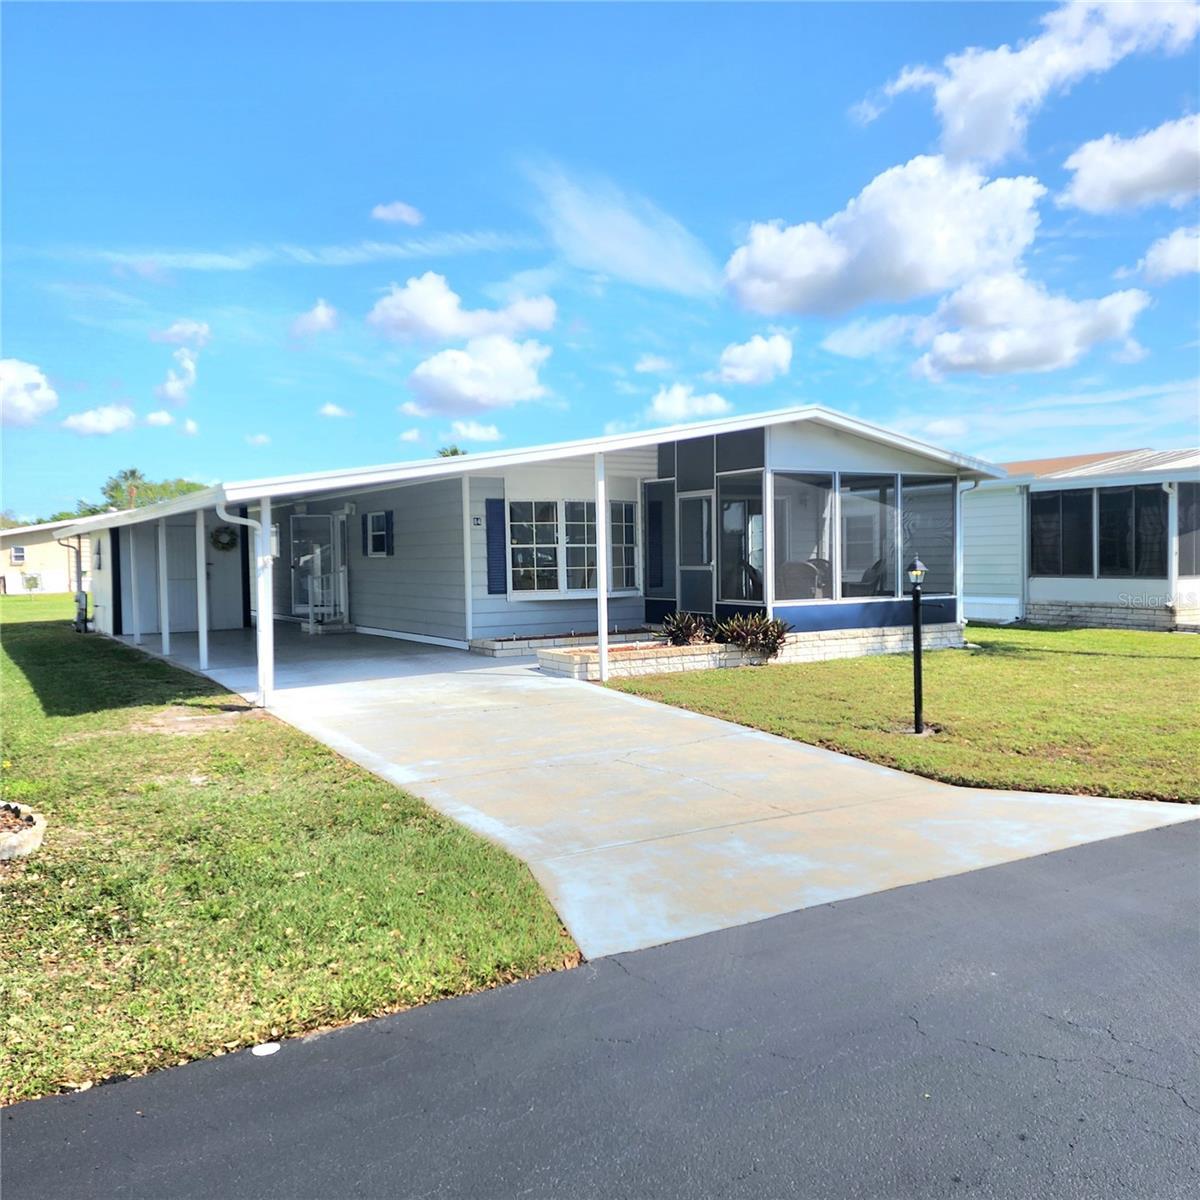 84 PARSON, WINTER HAVEN, Manufactured Home - Post 1977,  for sale, Crosby and Associates Inc